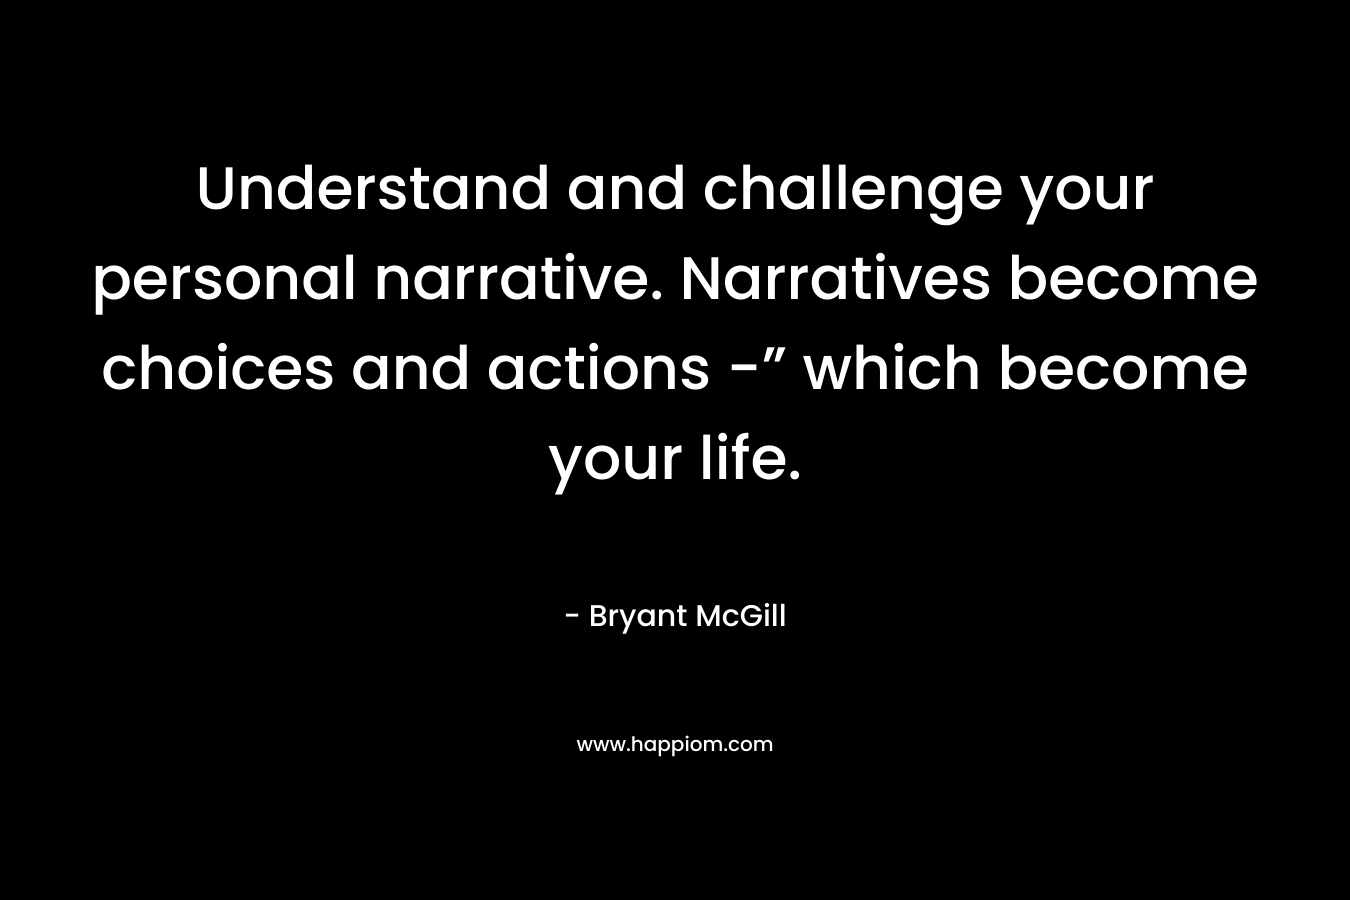 Understand and challenge your personal narrative. Narratives become choices and actions -” which become your life.